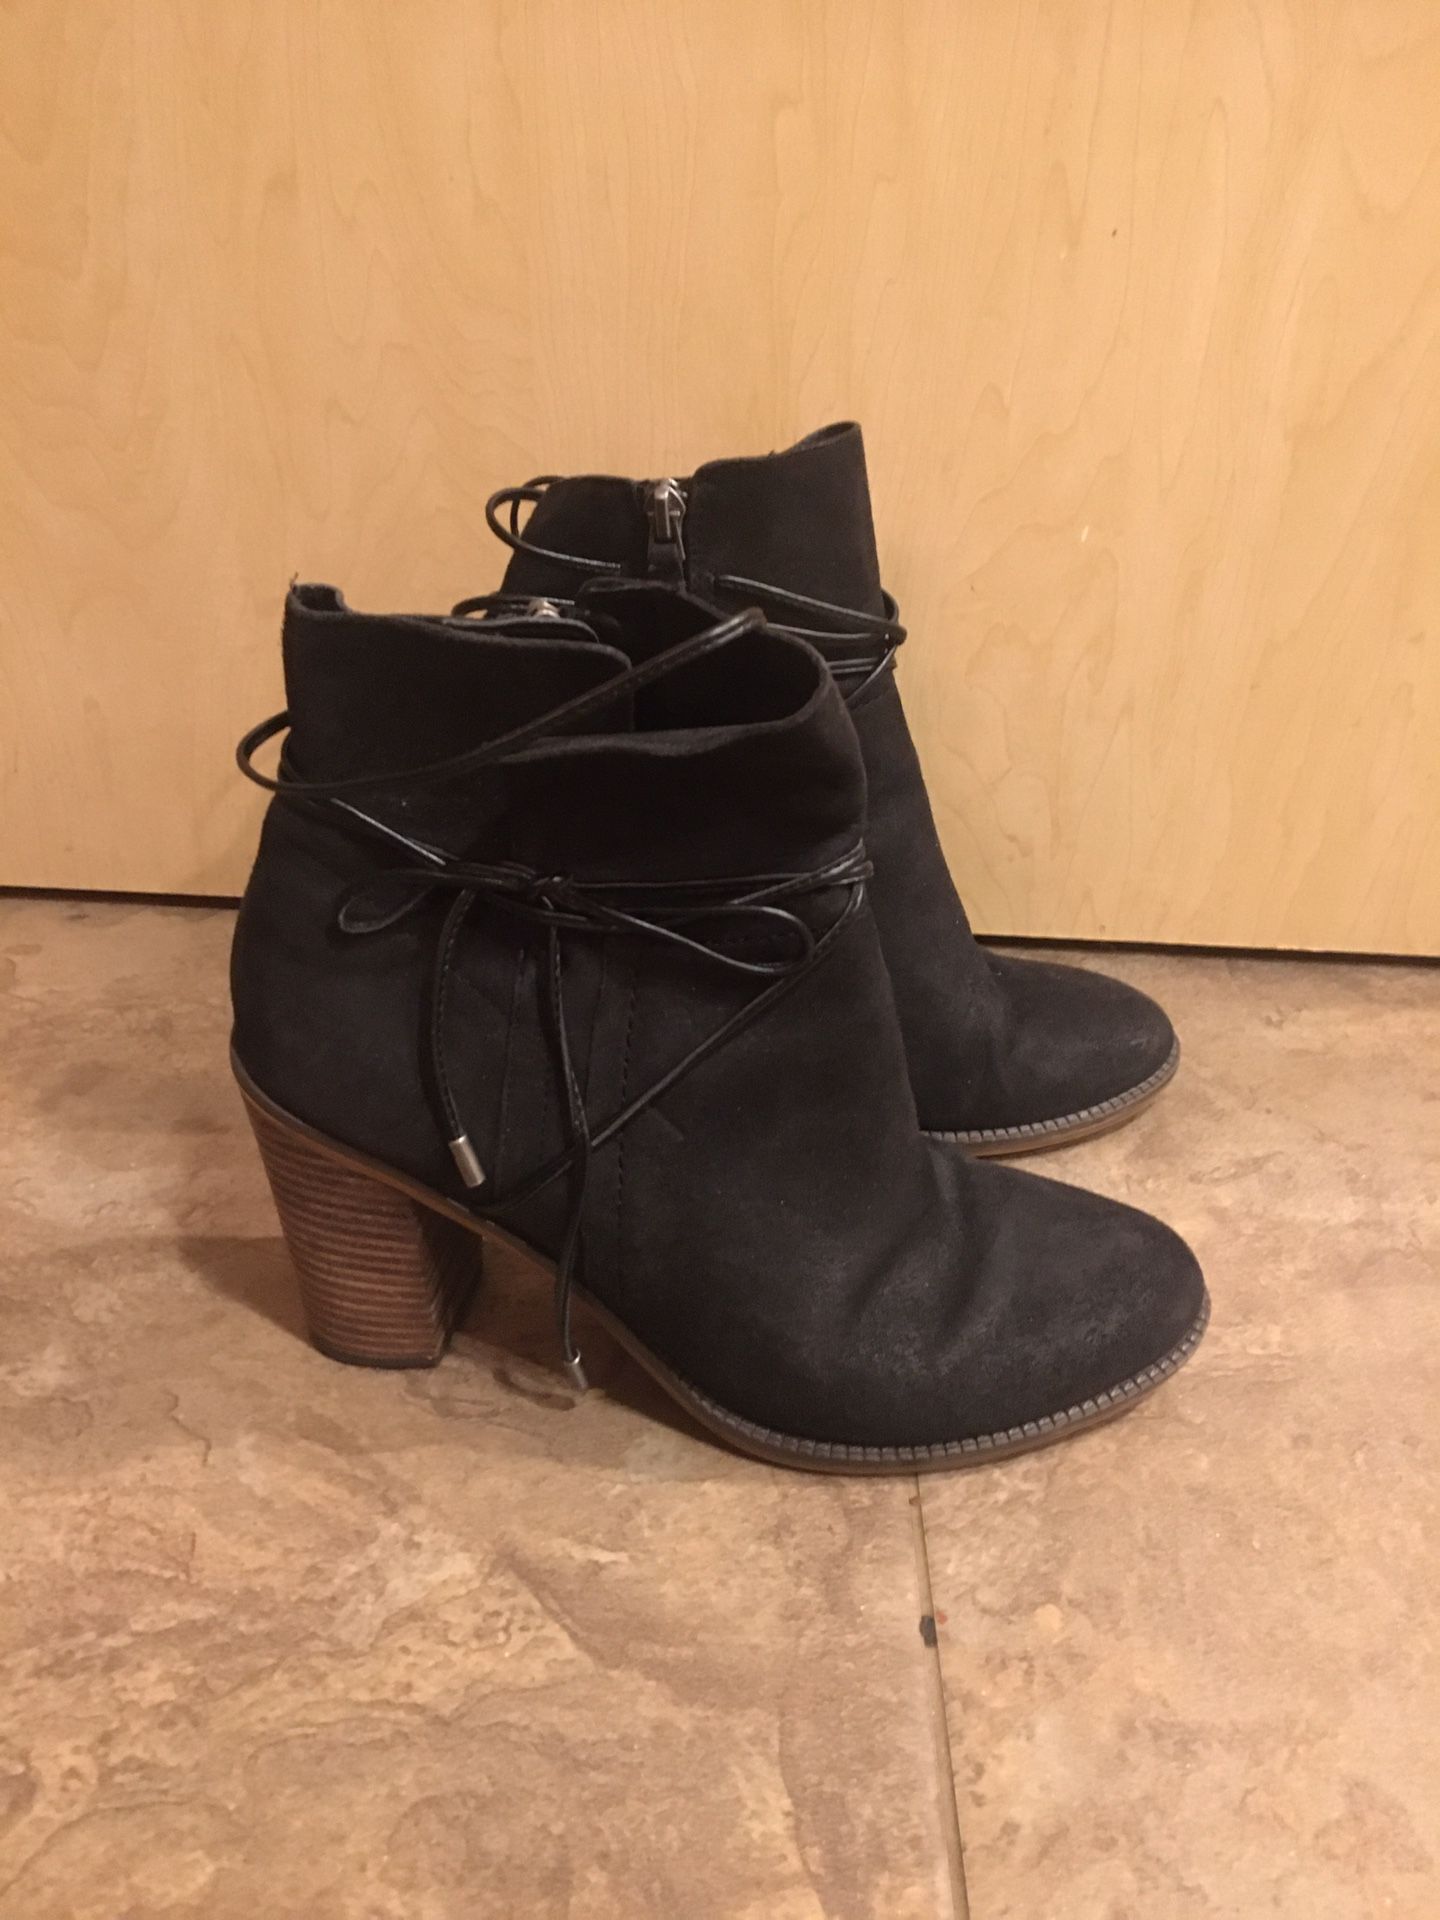 Black Franco Sarto leather boots. Women’s size 8. Good condition